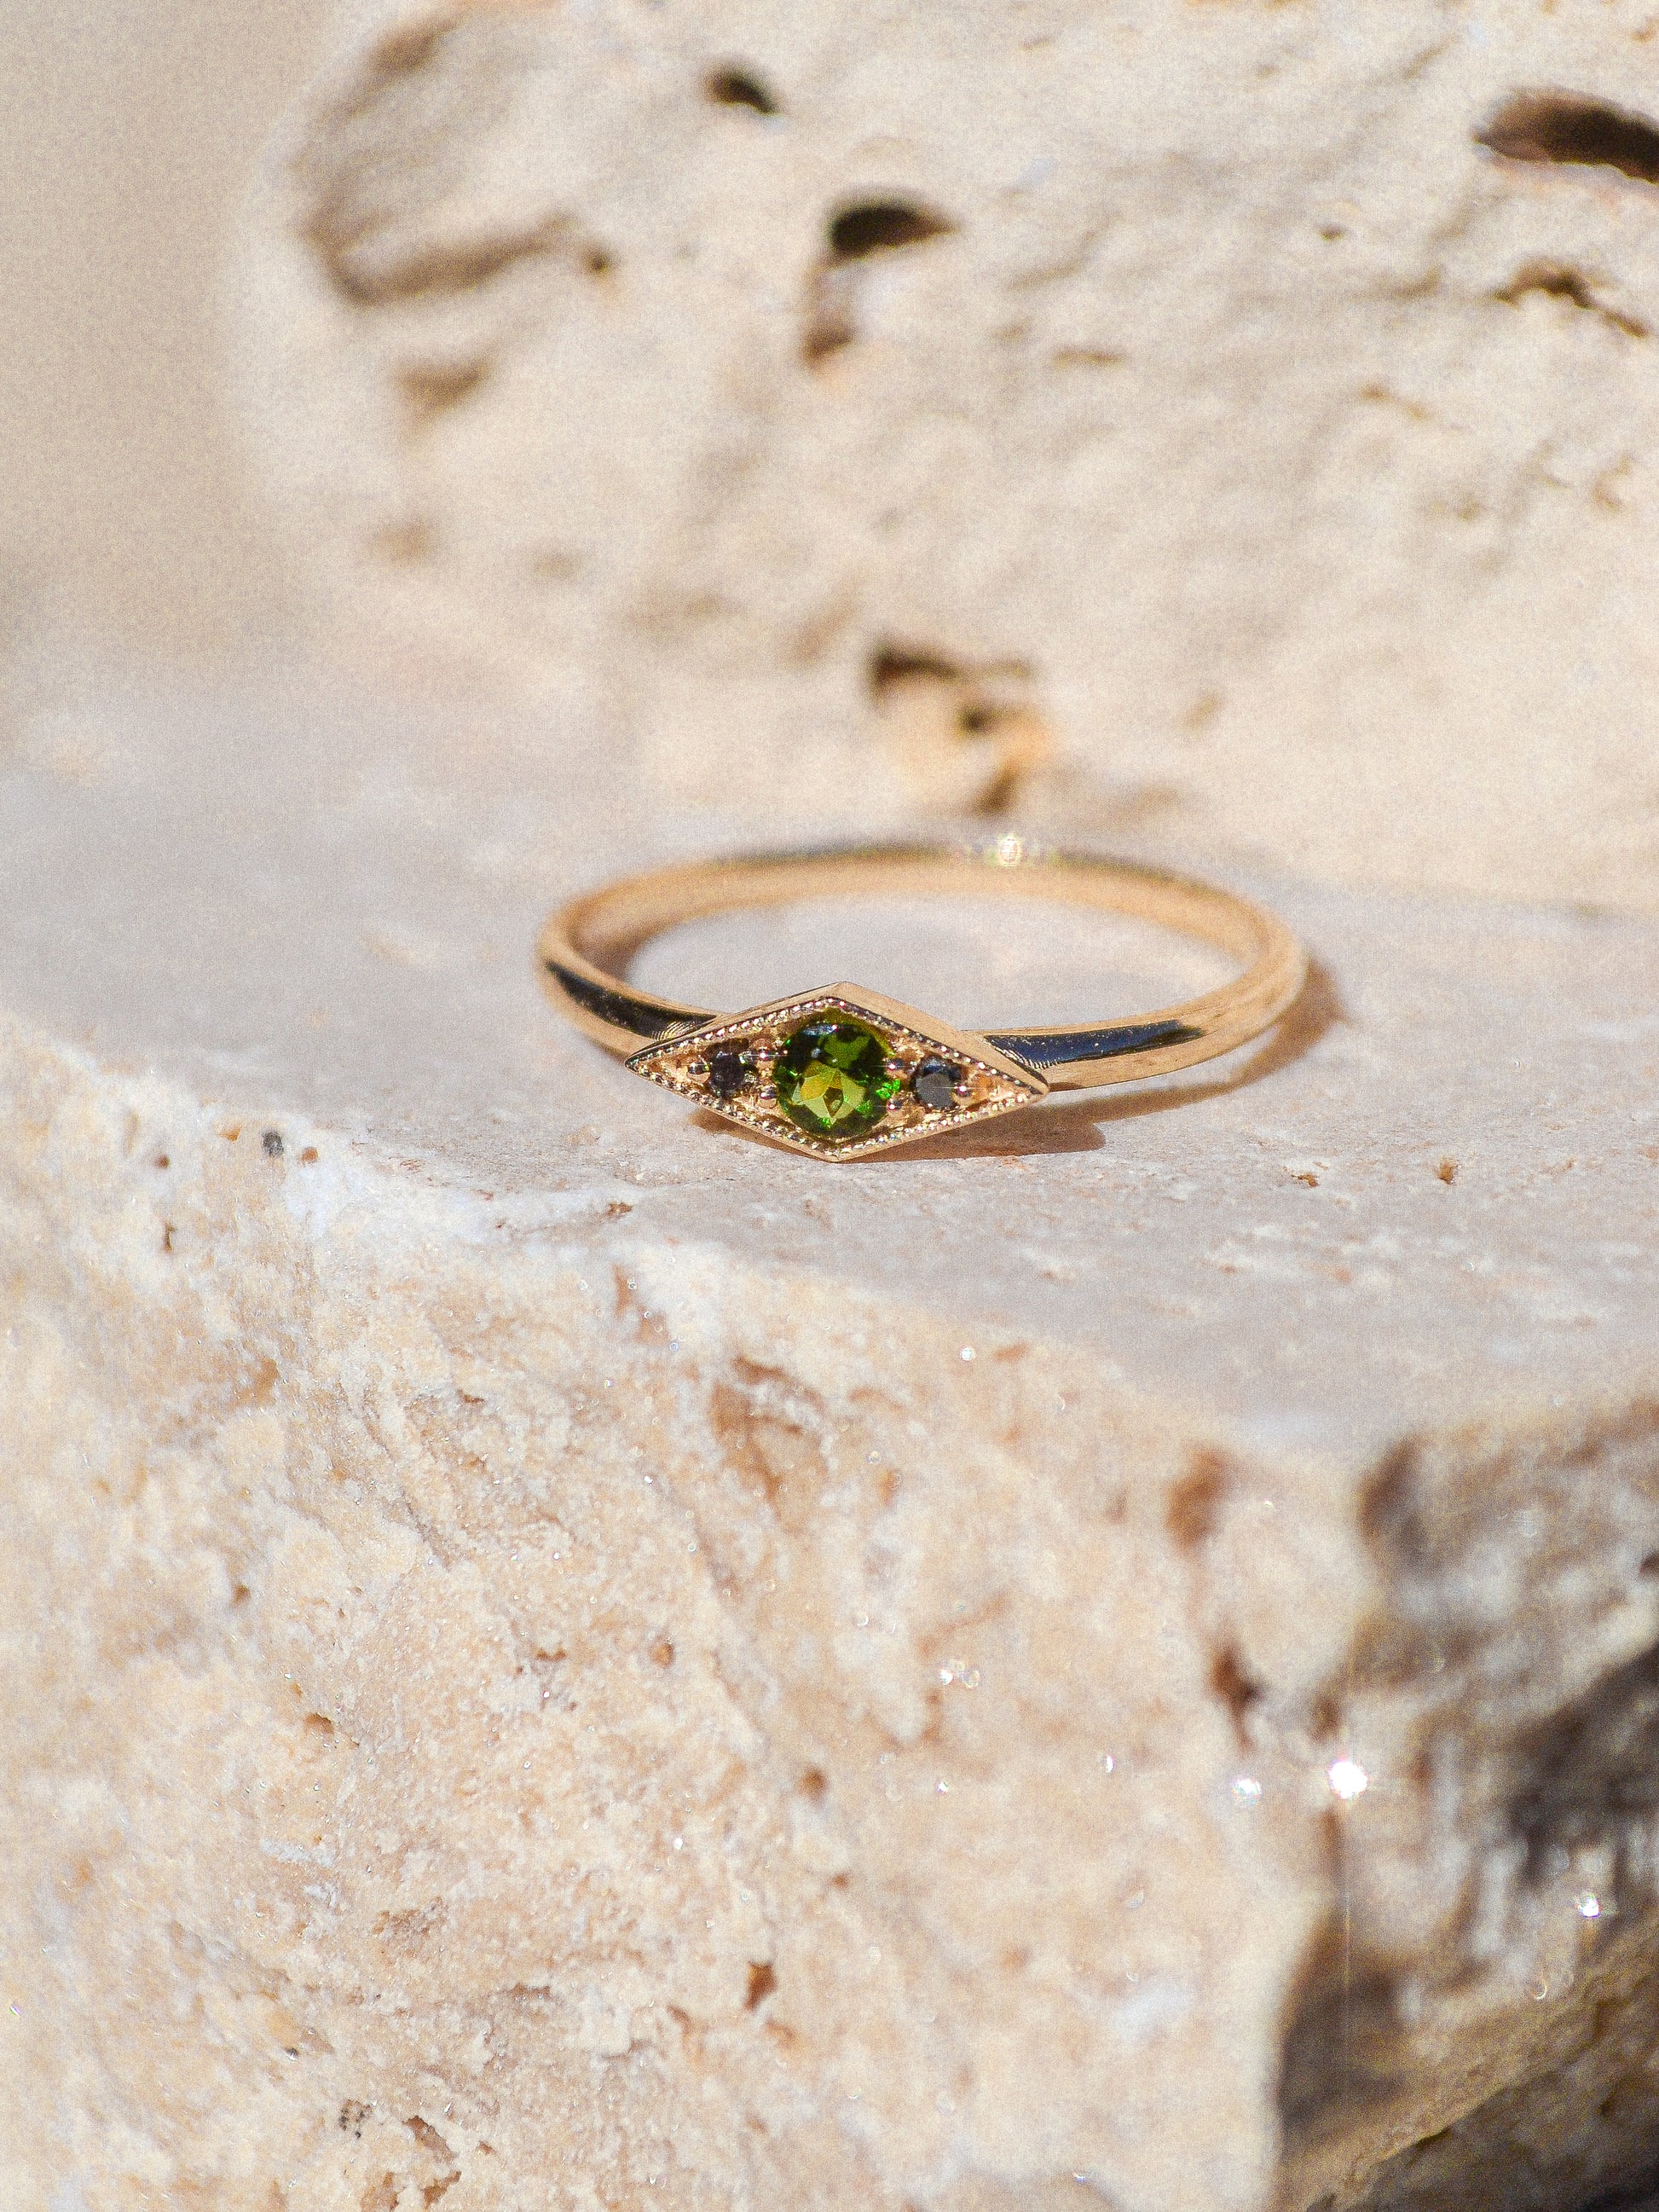 Deep blue green tourmaline encompassed in a diamond shape of solid 14k yellow gold and 2 black diamonds. A one of a kind ring inspired by an island in Scotland. Each Miarante piece is carefully handcrafted in Chicago by a skilled production team.